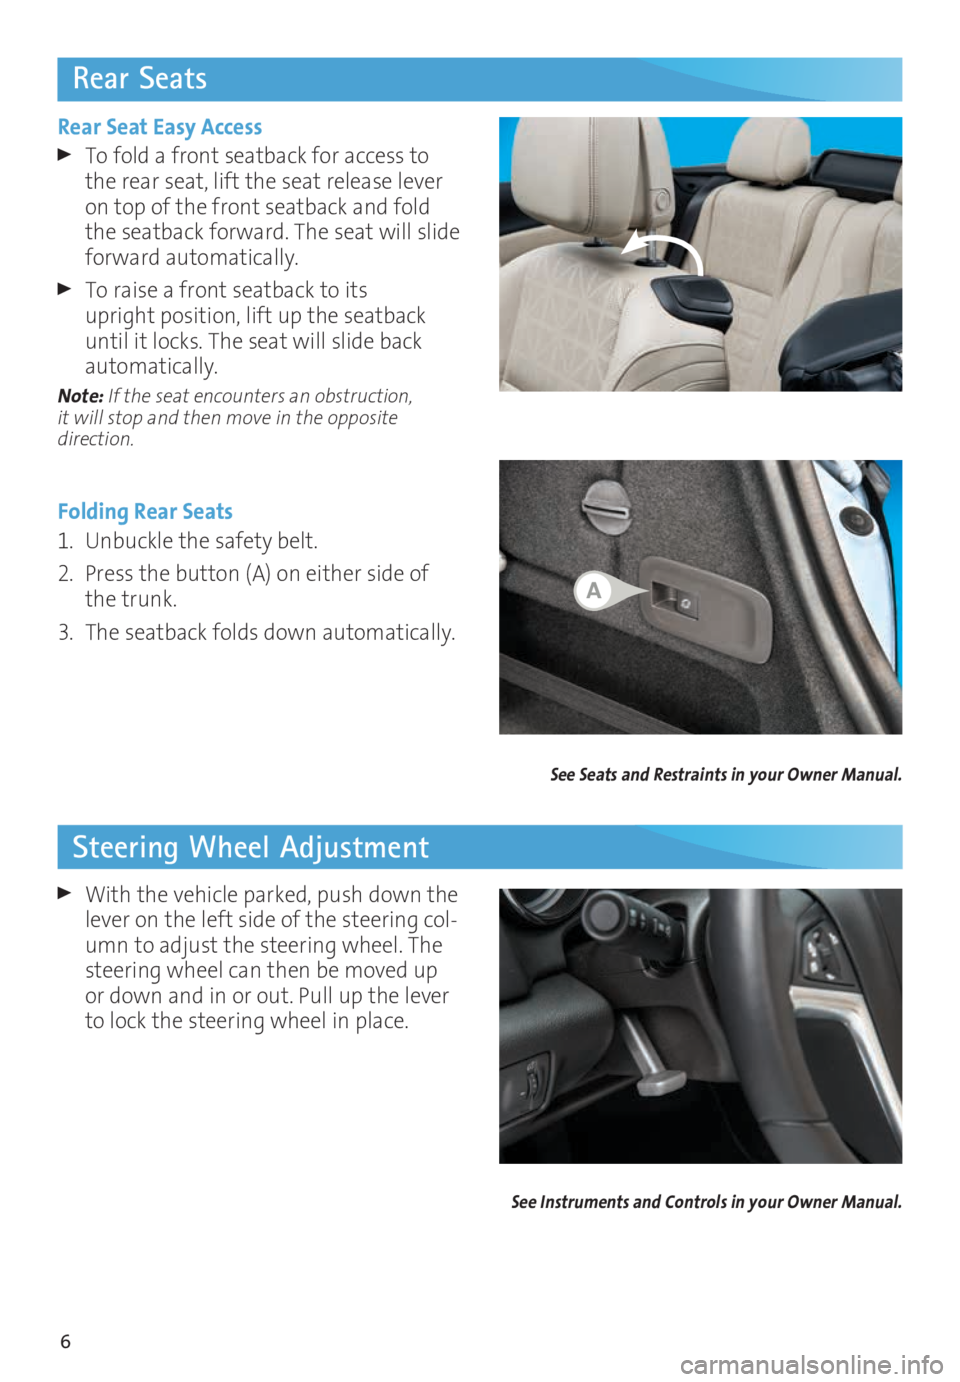 BUICK CASCADA 2016  Get To Know Guide 6
Rear Seats
Steering Wheel Adjustment
Rear Seat Easy Access
  To fold a front seatback for access to 
the rear seat, lift the seat release lever 
on top of the front seatback and fold 
the seatback f